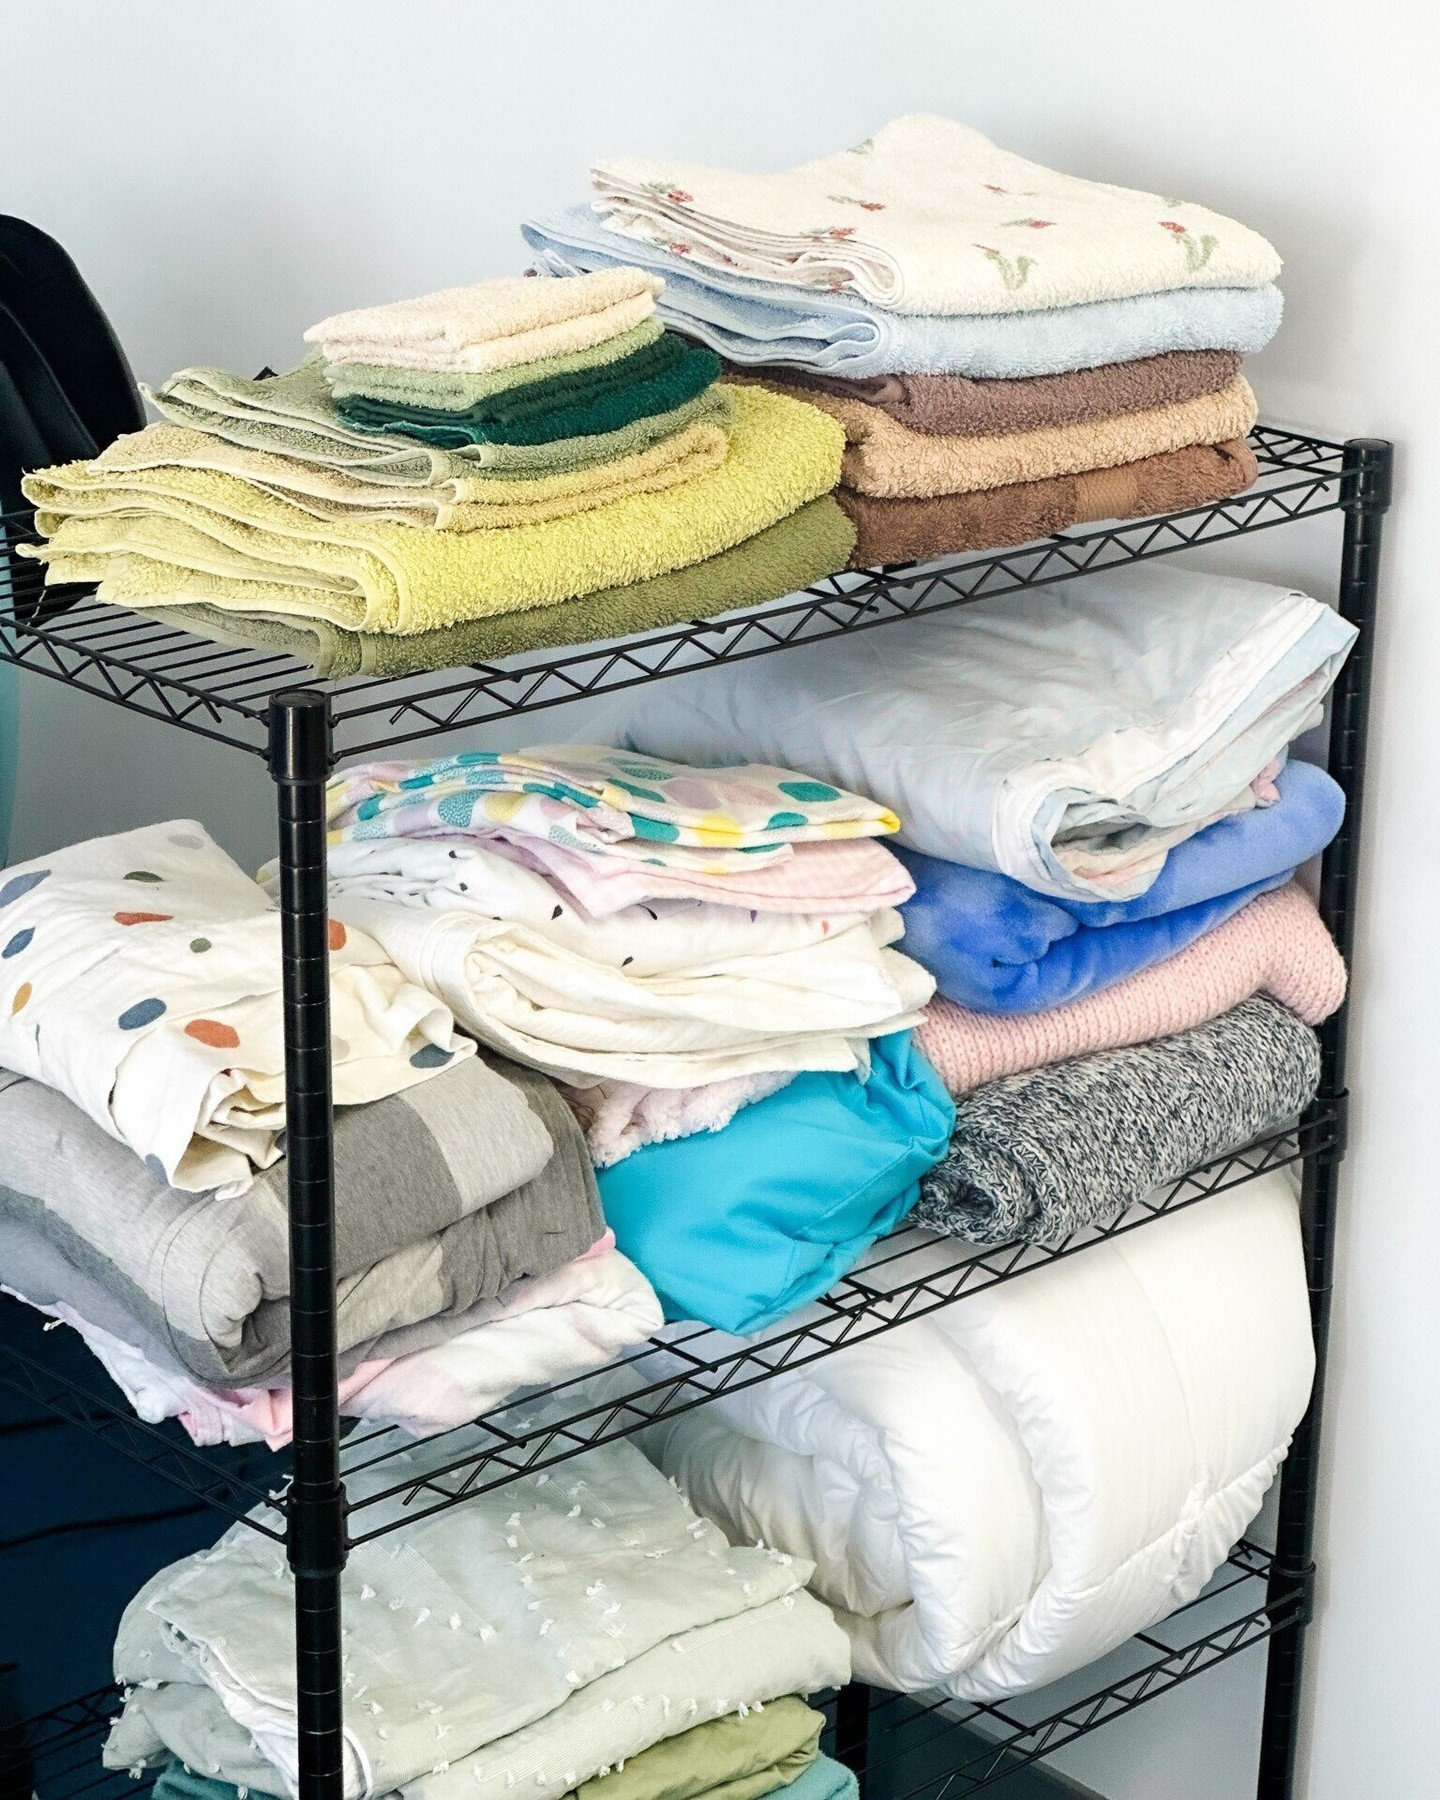 💗 Gratitude Overflowing! 💗

Wow, just wow! 🙌 Our hearts are bursting with gratitude for all the amazing folks who donated bed linen and towels. We're absolutely blown away by your generosity and kindness! 🌟

Thanks to your incredible donations, w